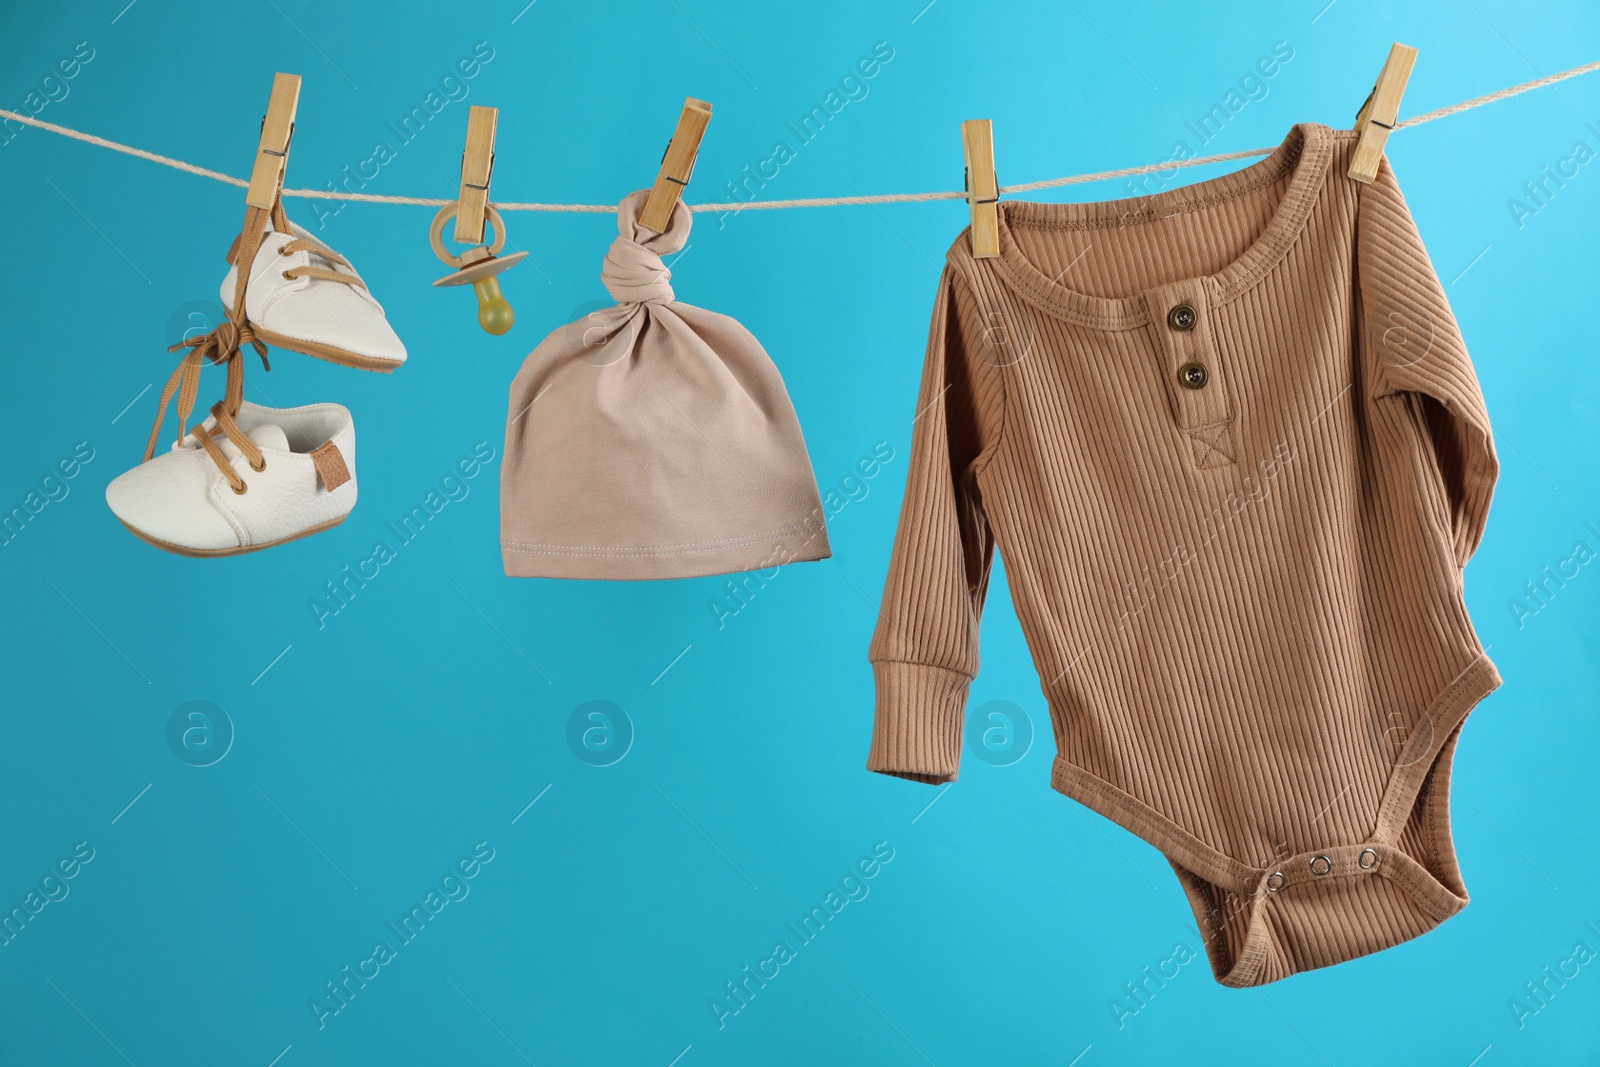 Photo of Baby clothes and accessories hanging on washing line against light blue background